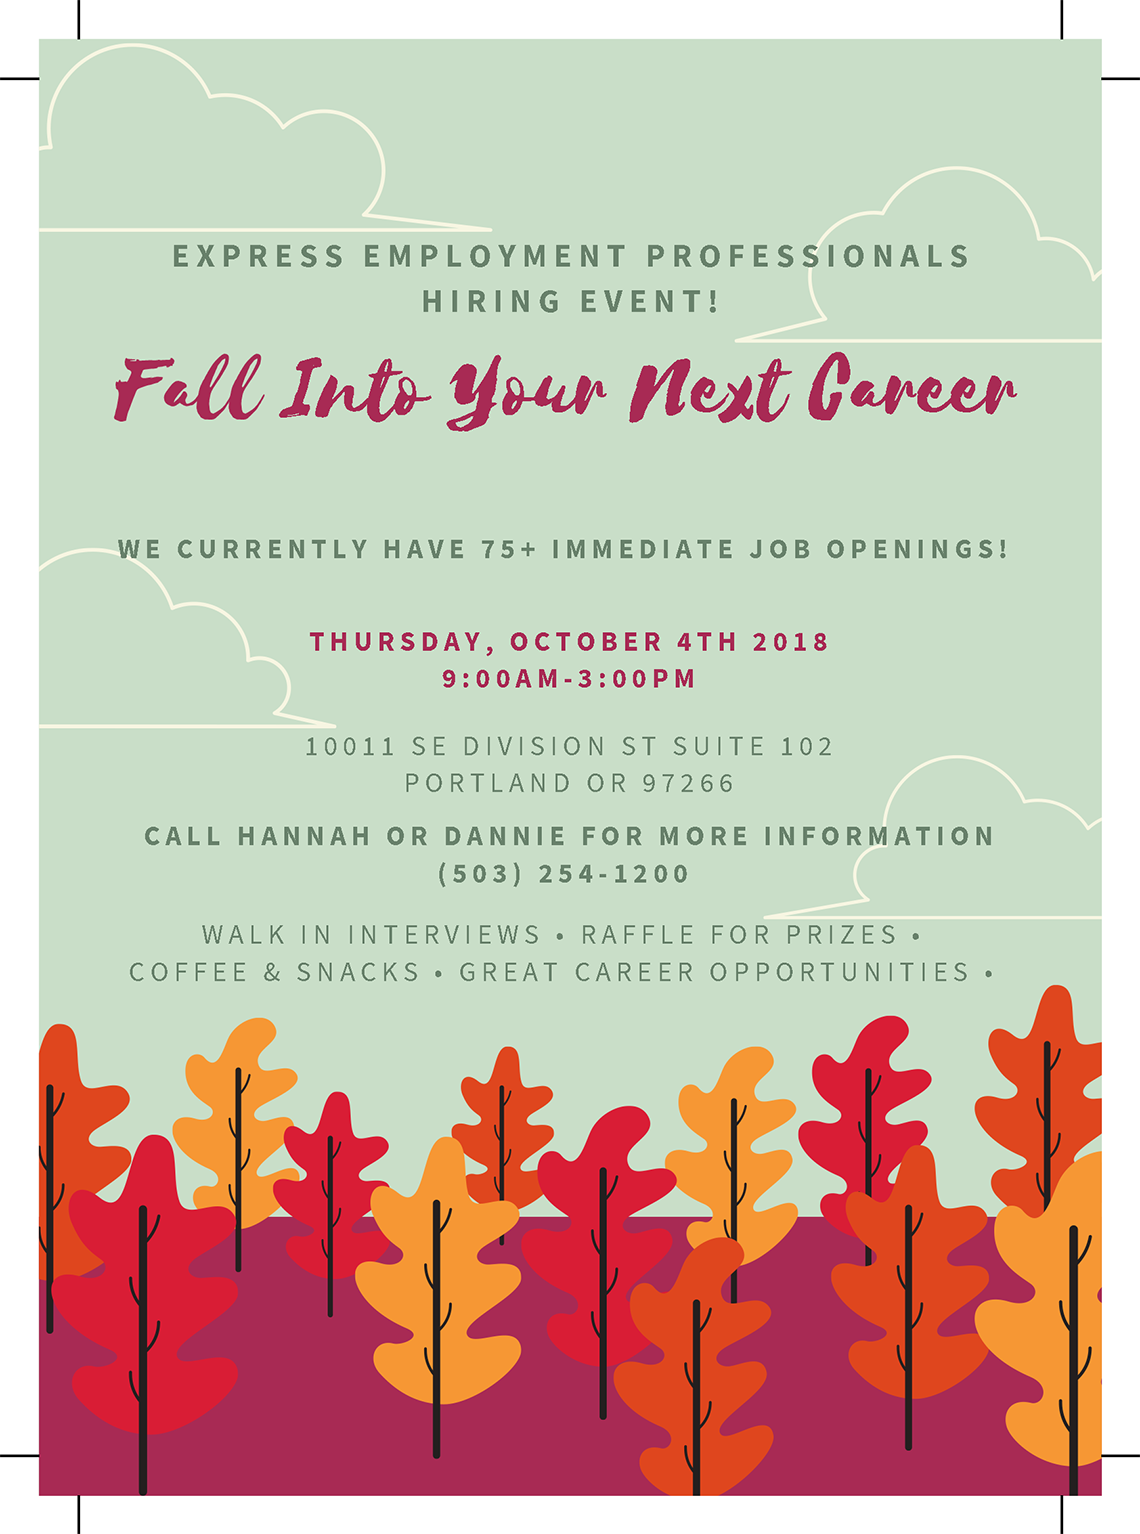 Fall Into Your Next Career - Now Hiring in Portland, OR